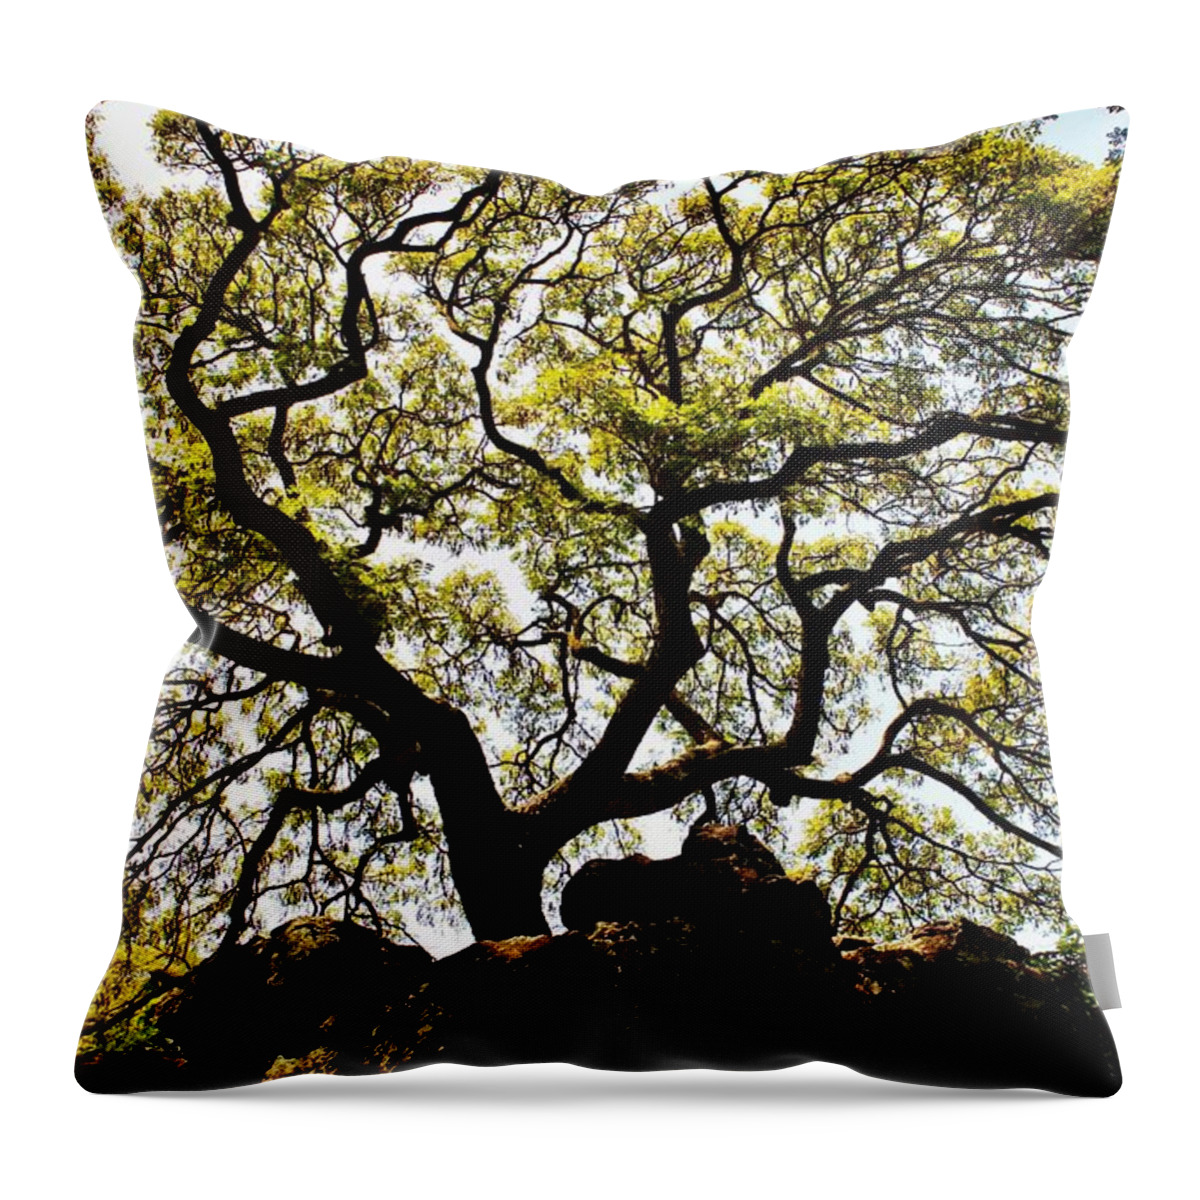 Tree Throw Pillow featuring the photograph Branching Out by Craig Wood